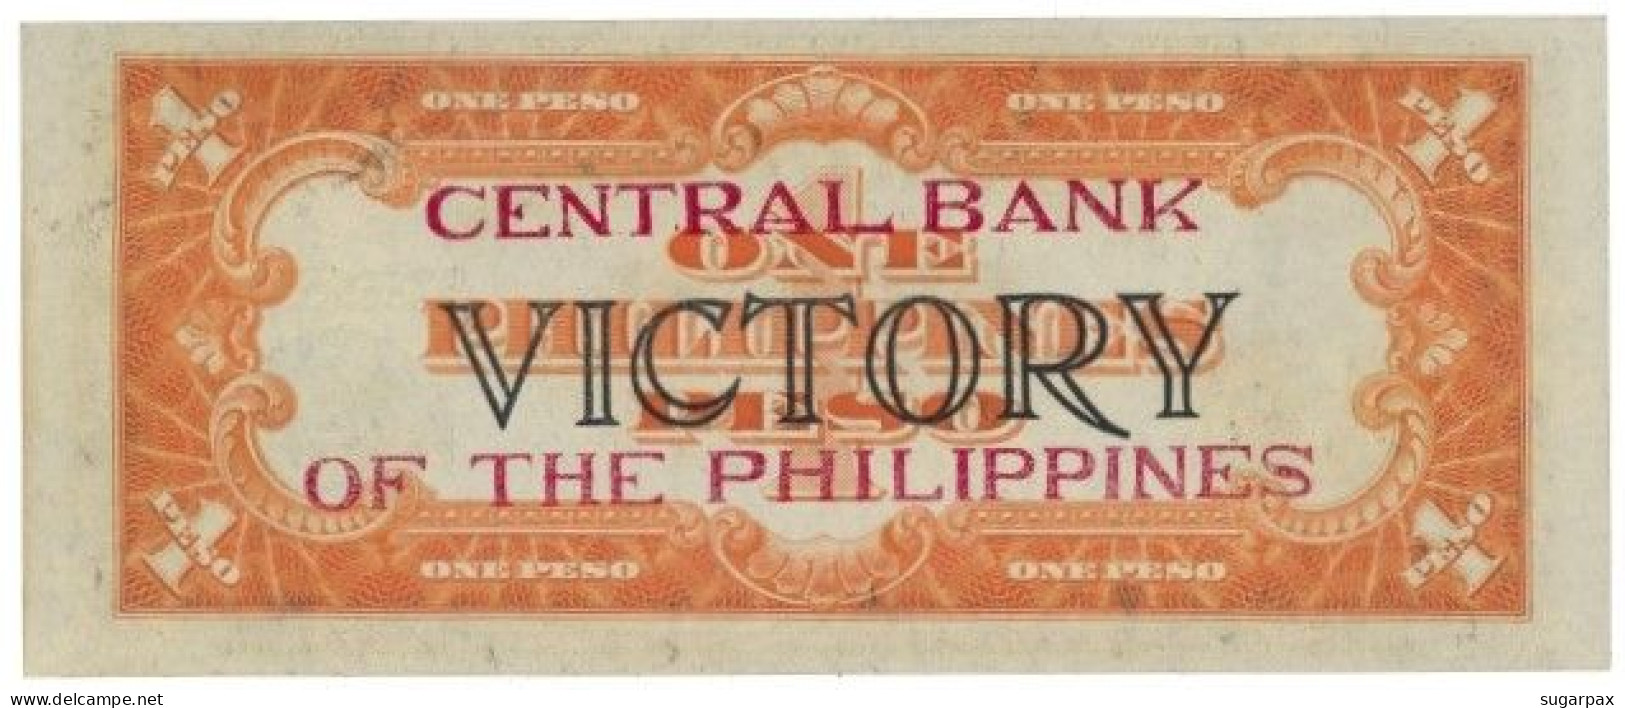 Philippines - 1 Peso - ND ( 1949 ) - Pick 117 - AUNC. - Serie VICTORY With RED Overprint CENTRAL BANK OF PHILIPPINES - Philippinen